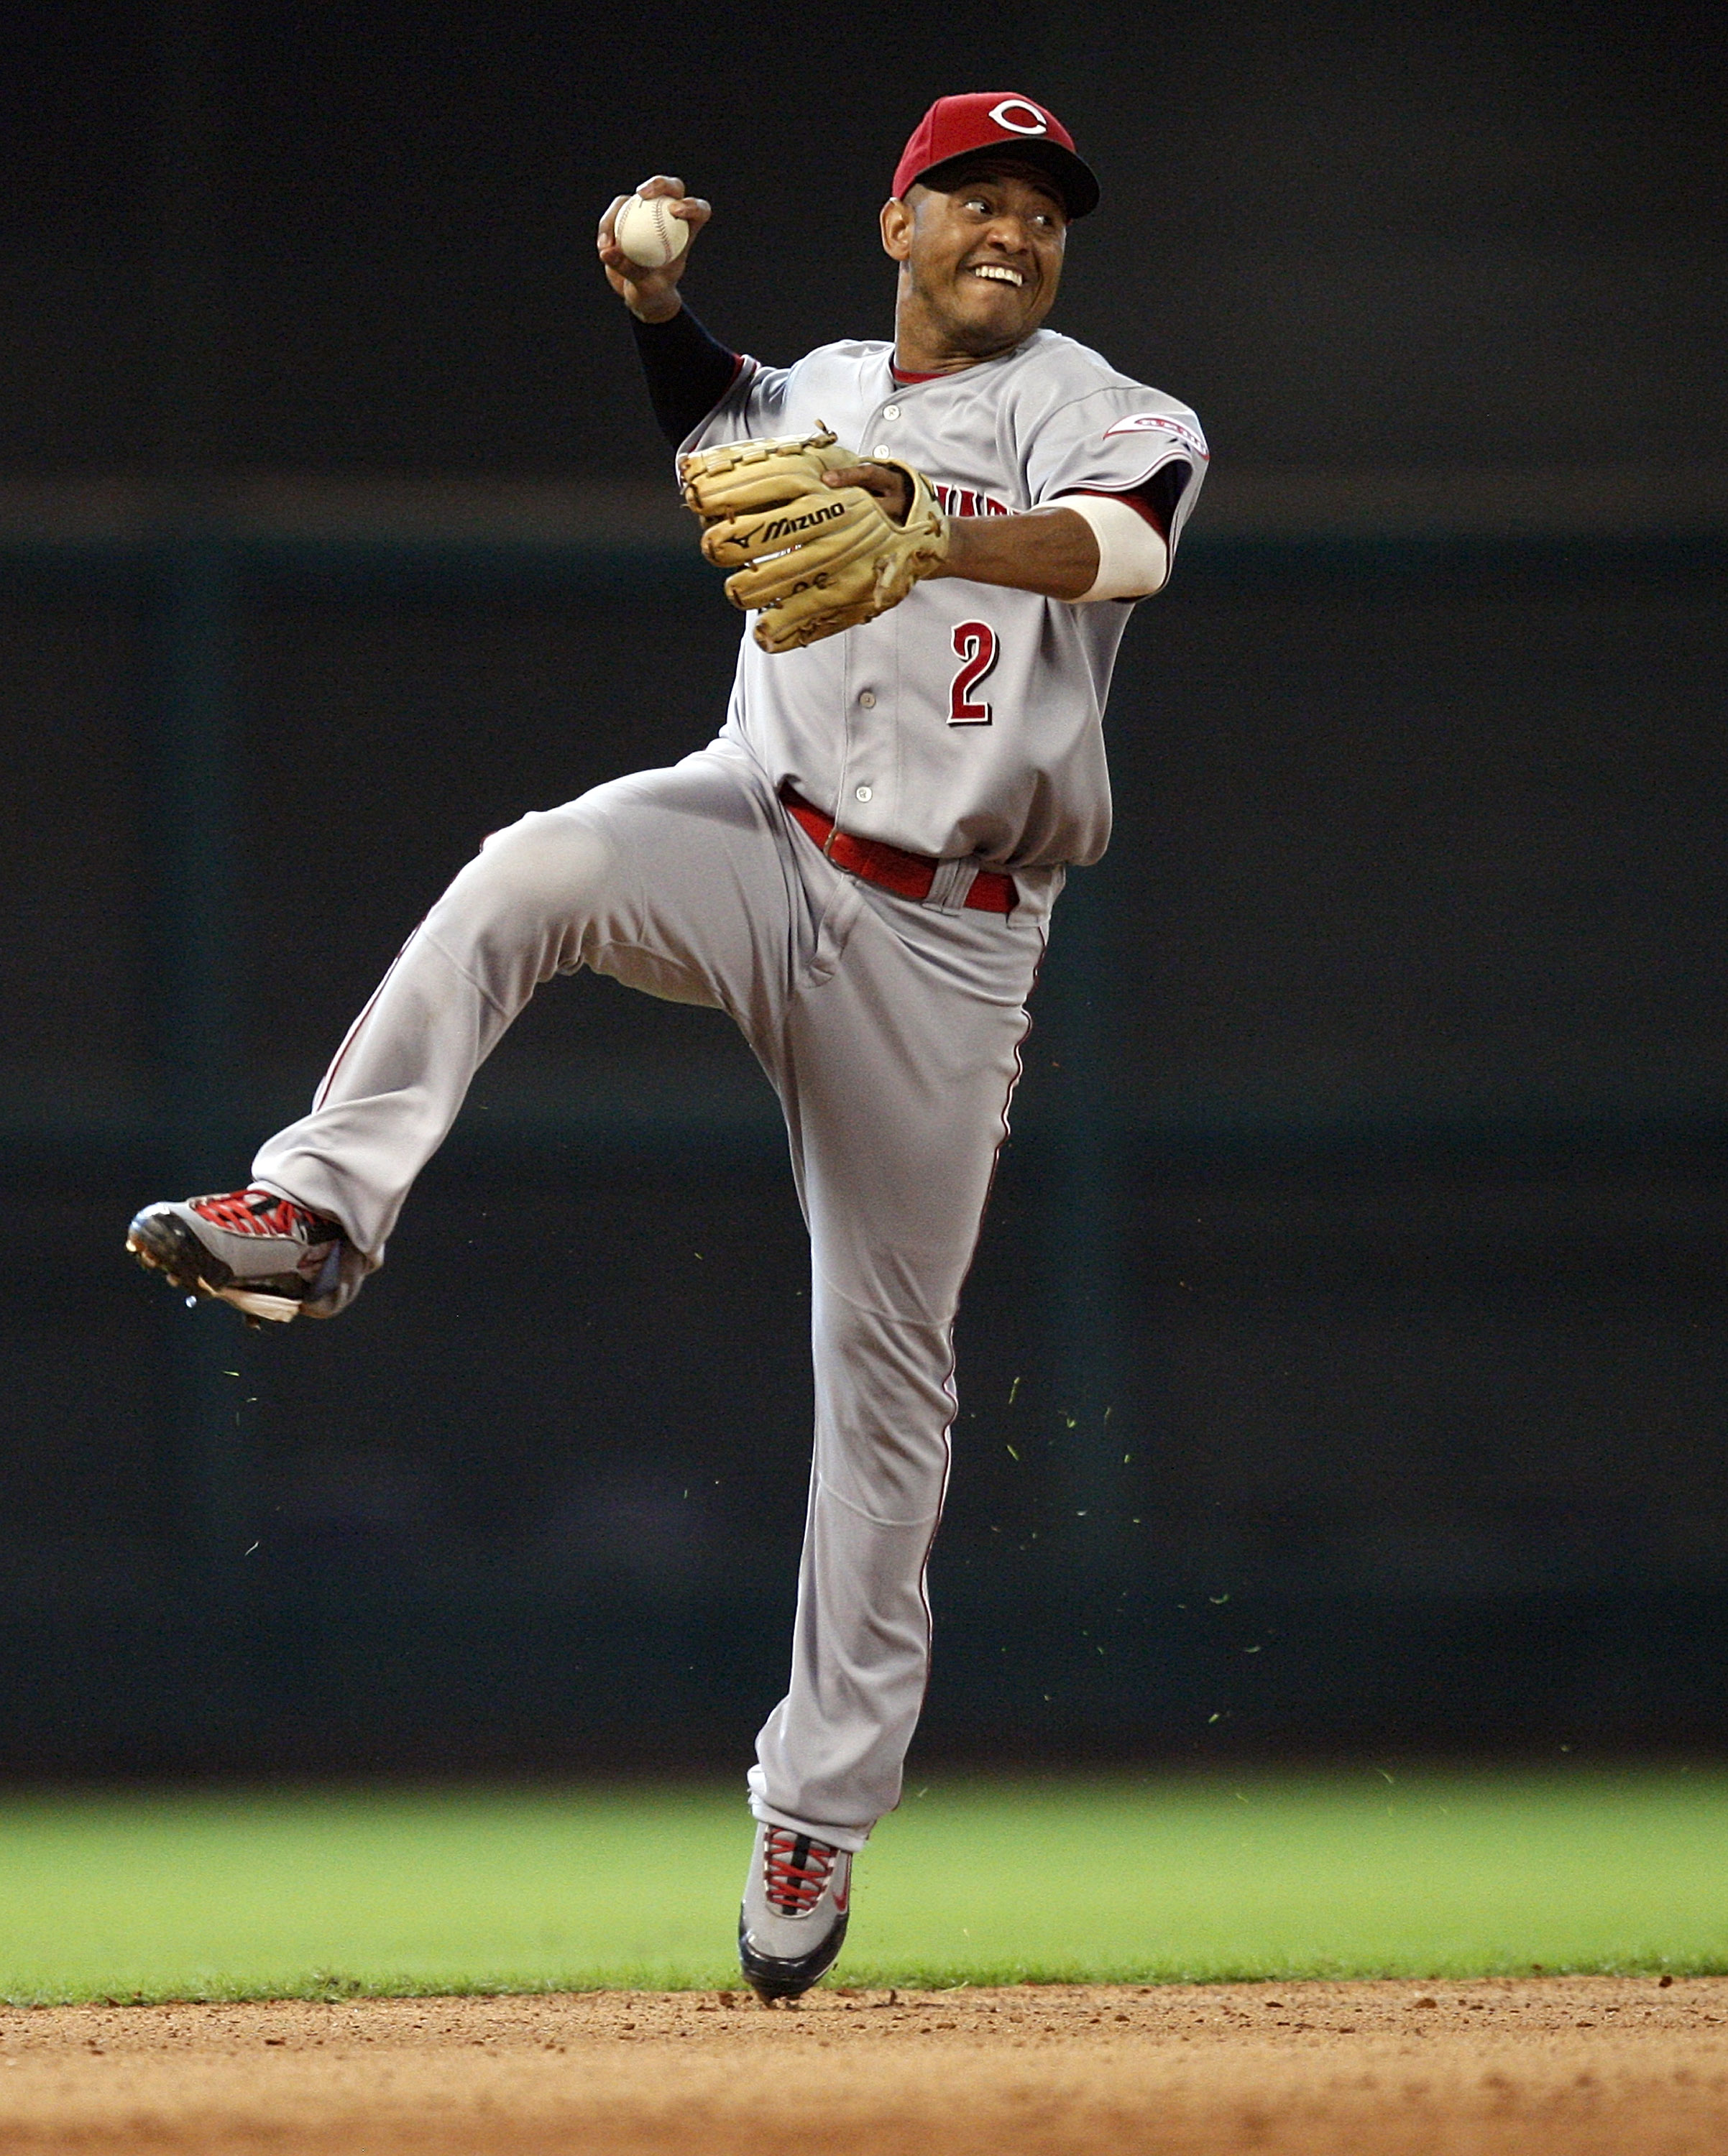 HOUSTON - JULY 25:  Shortstop Orlando Cabrera #2 makes a throw from deep in the hole against the Houston Astros at Minute Maid Park on July 25, 2010 in Houston, Texas.  (Photo by Bob Levey/Getty Images)